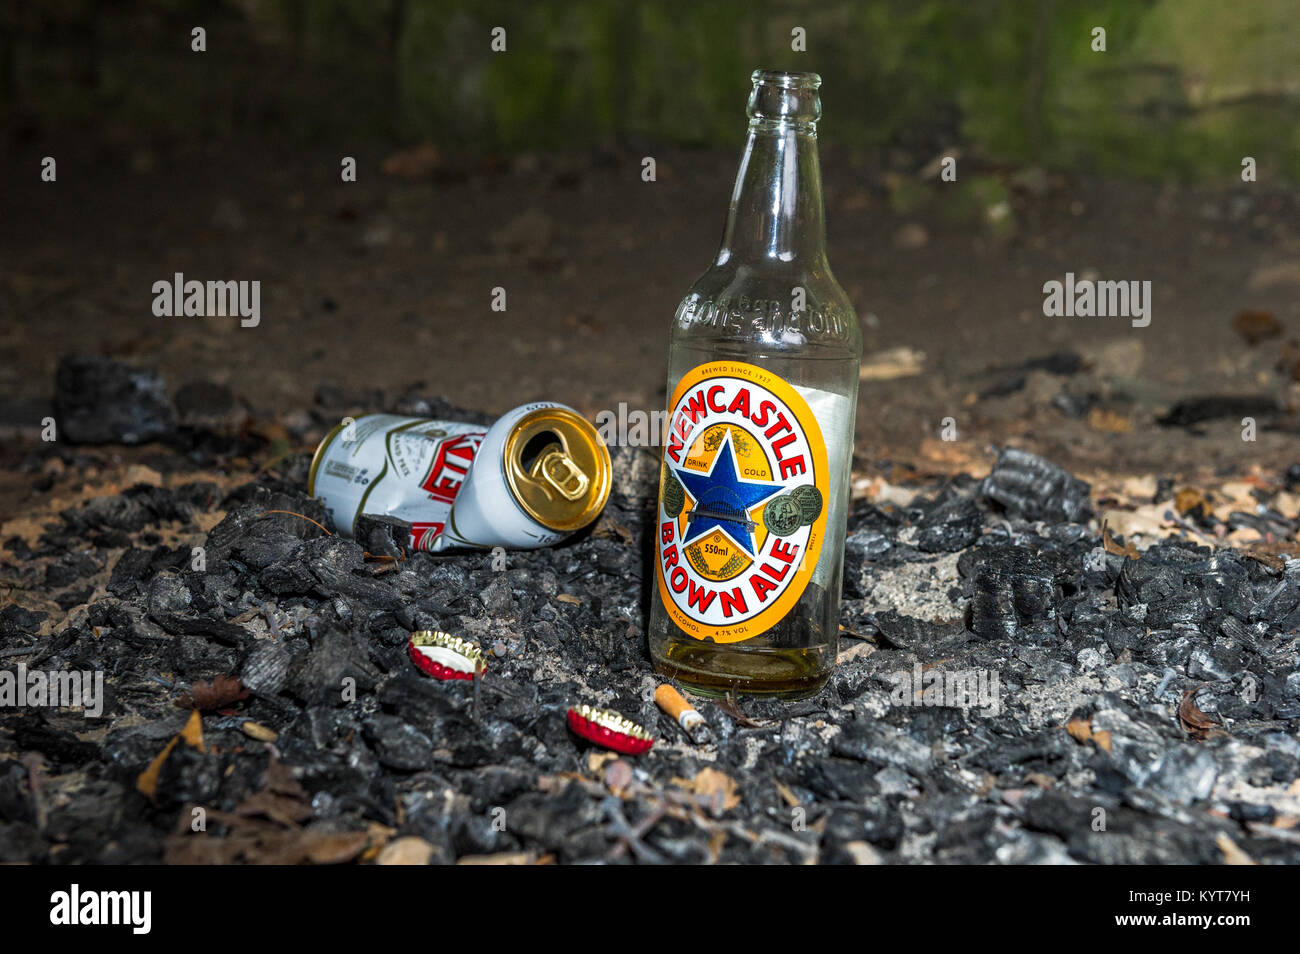 Empty and discarded beer bottle and can in the ashes of a fire. Stock Photo